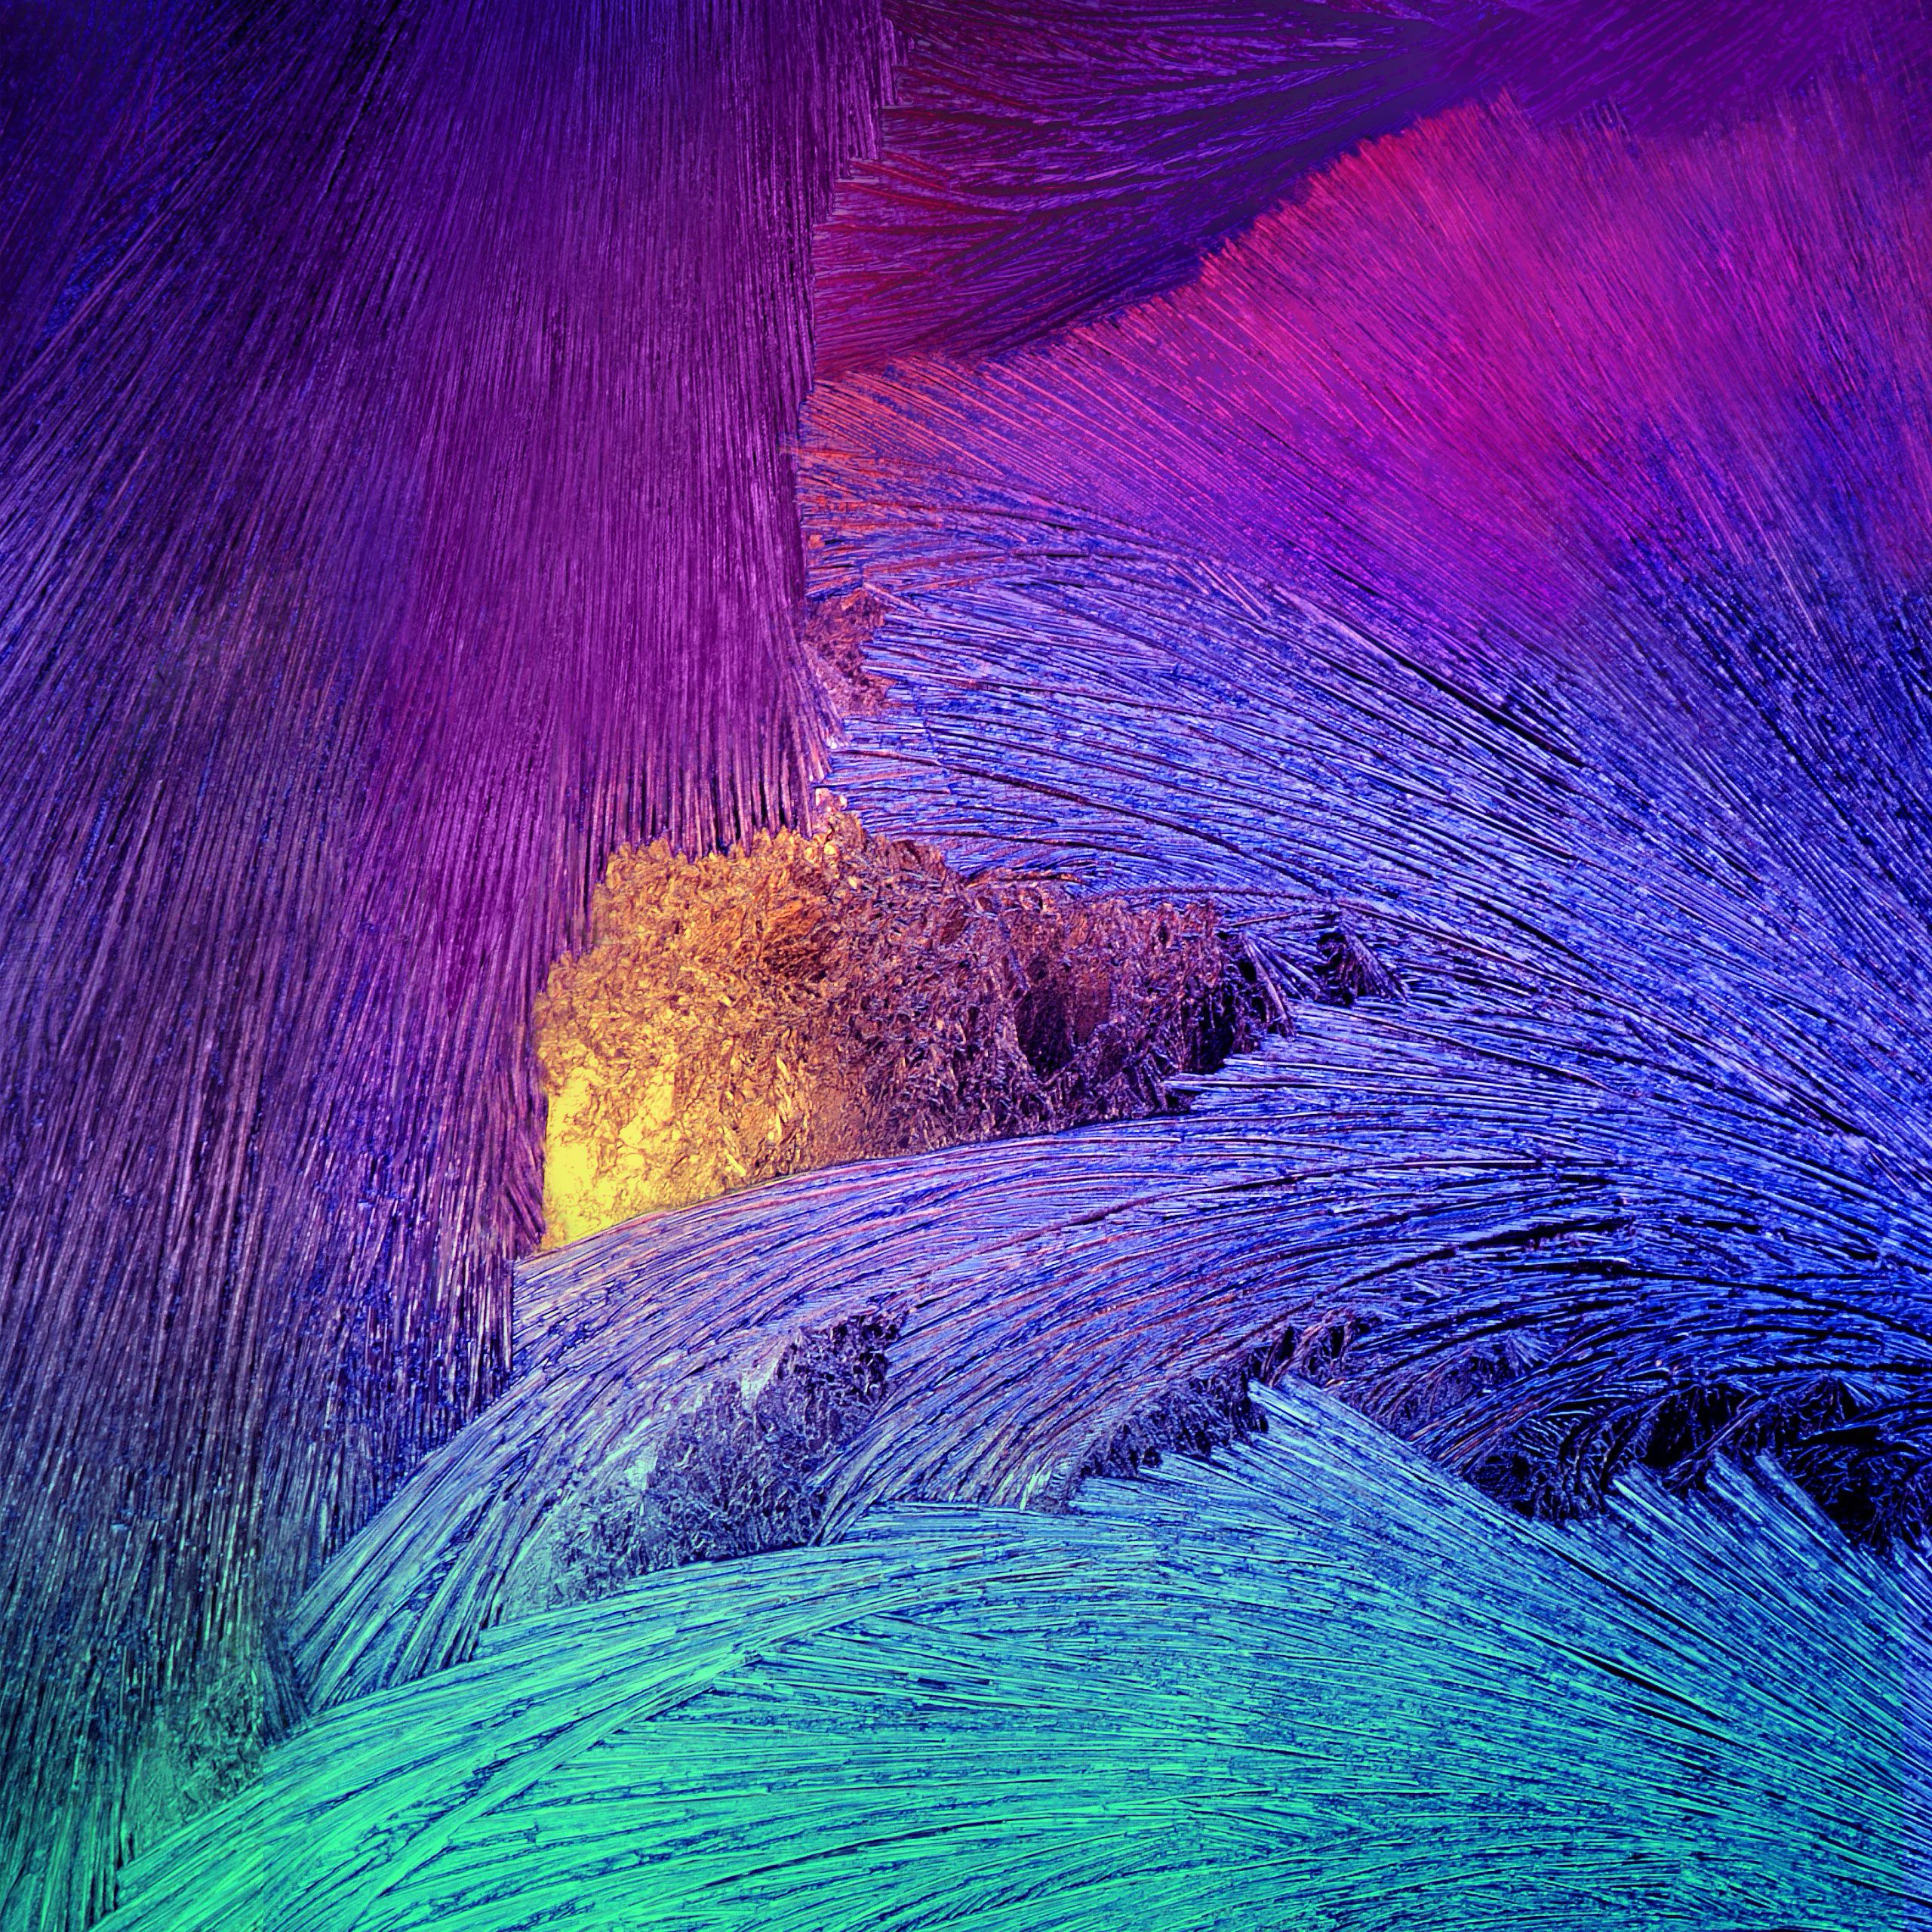 Download Samsung Galaxy Note 4 Original Wallpaper. Download guides and firmwares of XDA